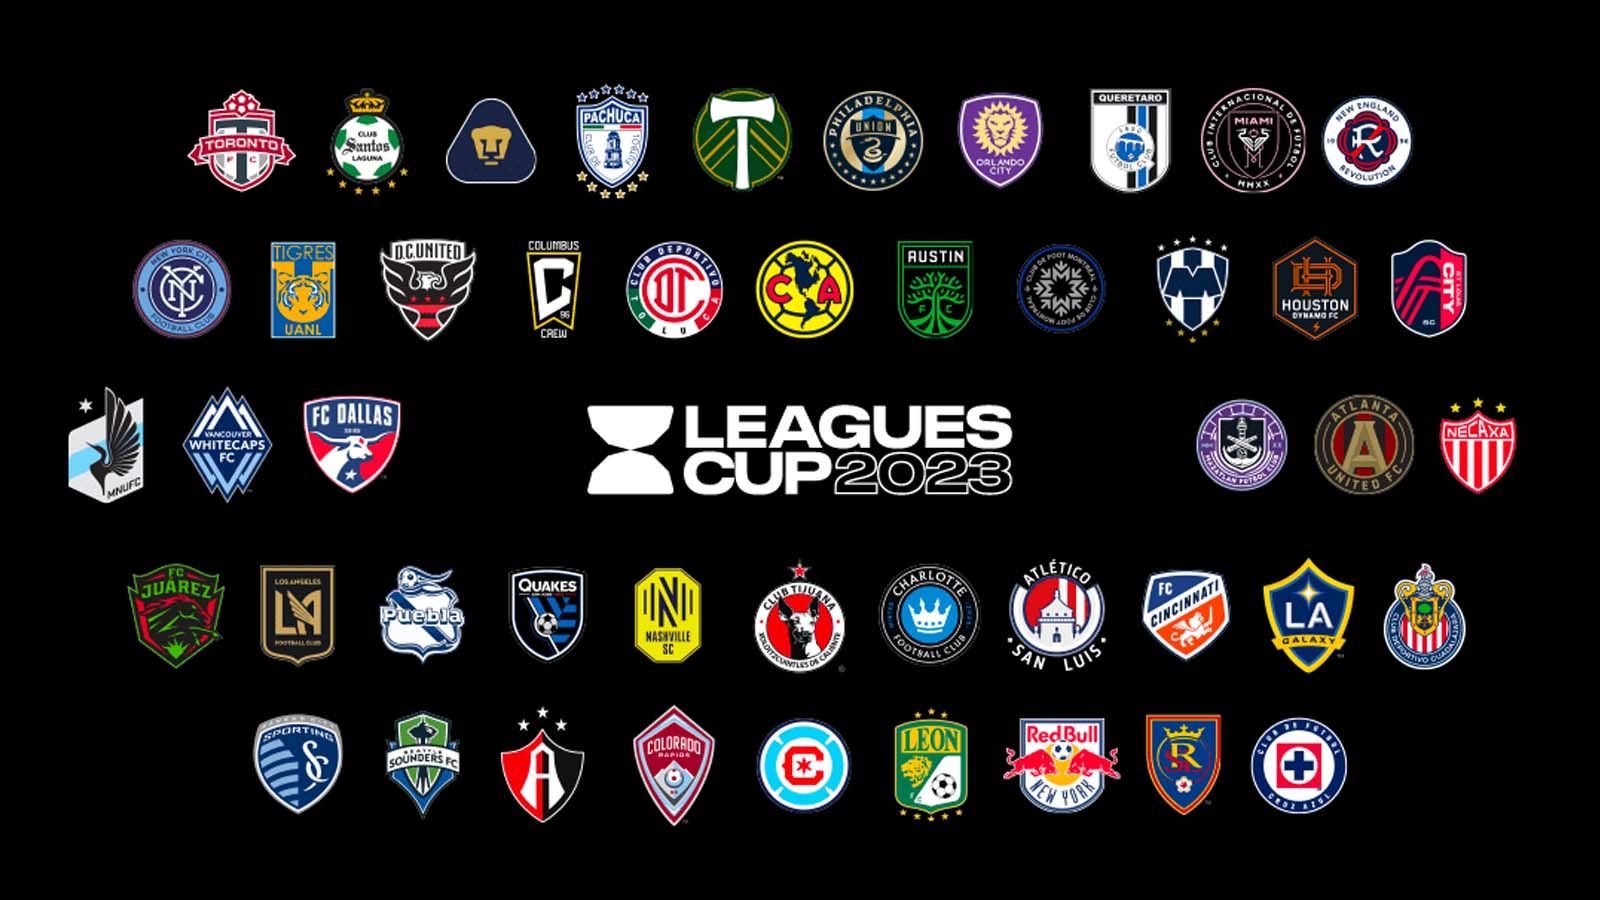 Details revealed for Leagues Cup 2023 featuring every MLS and Liga MX team